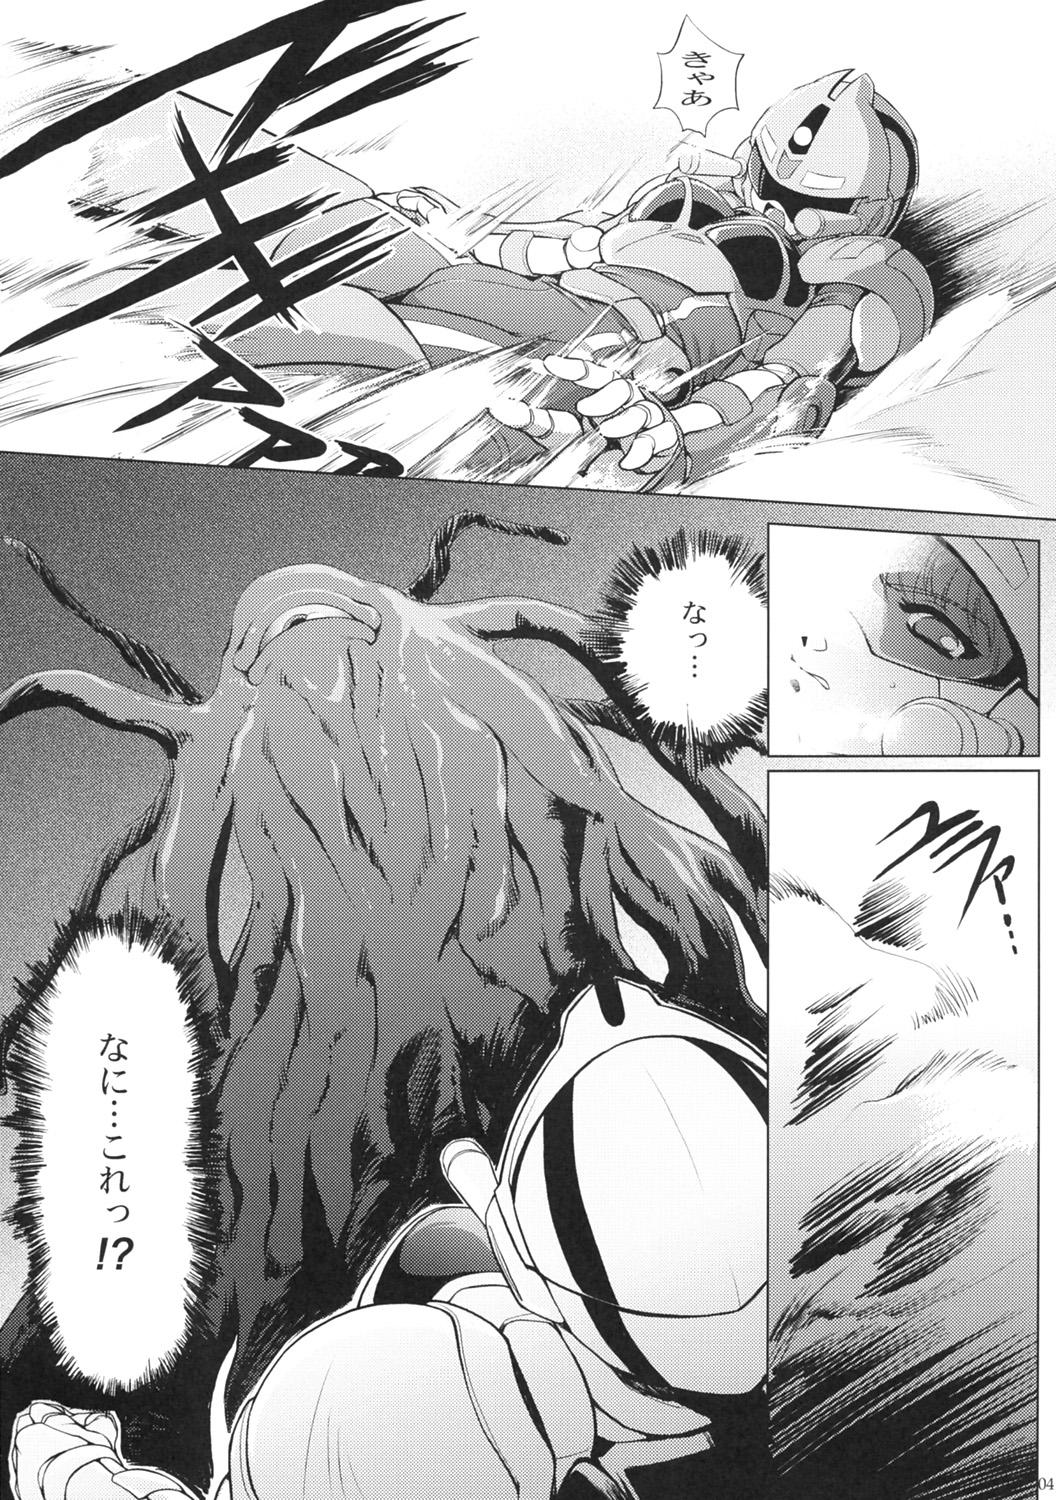 Mujer Manga Onsoku no Are - Sonic soldier borgman Stepsiblings - Page 5